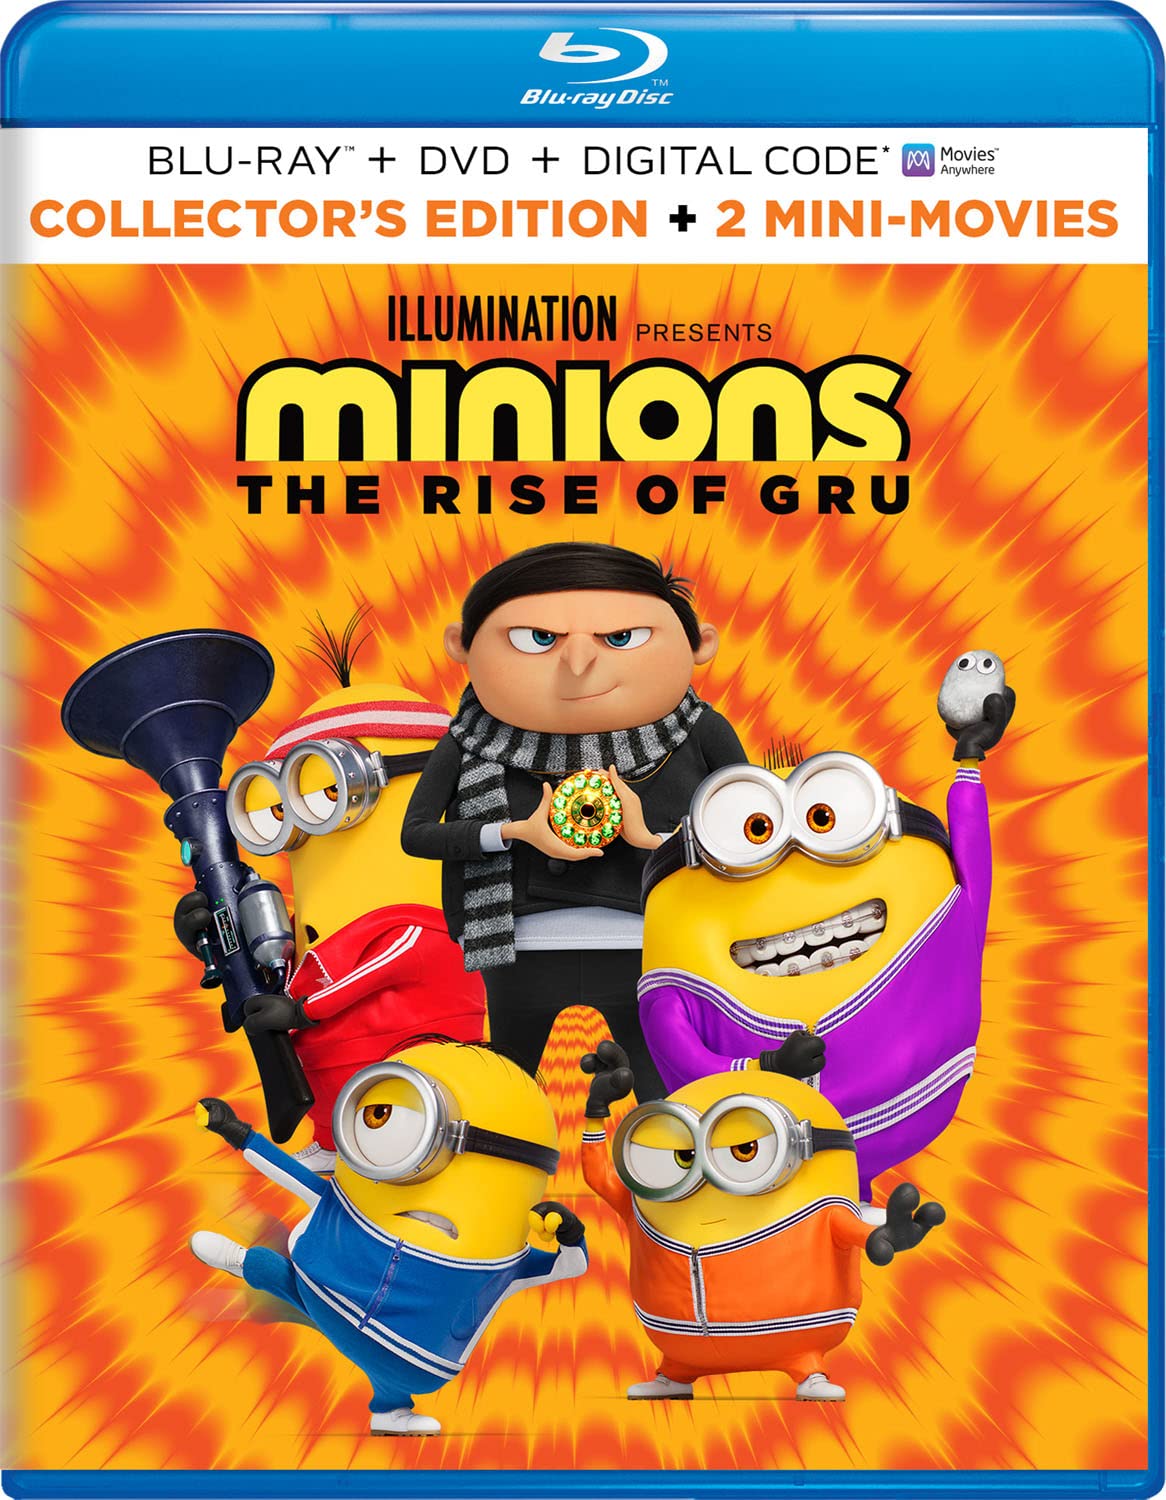 Minions- The Rise of Gru Blu-ray Collectors Edition